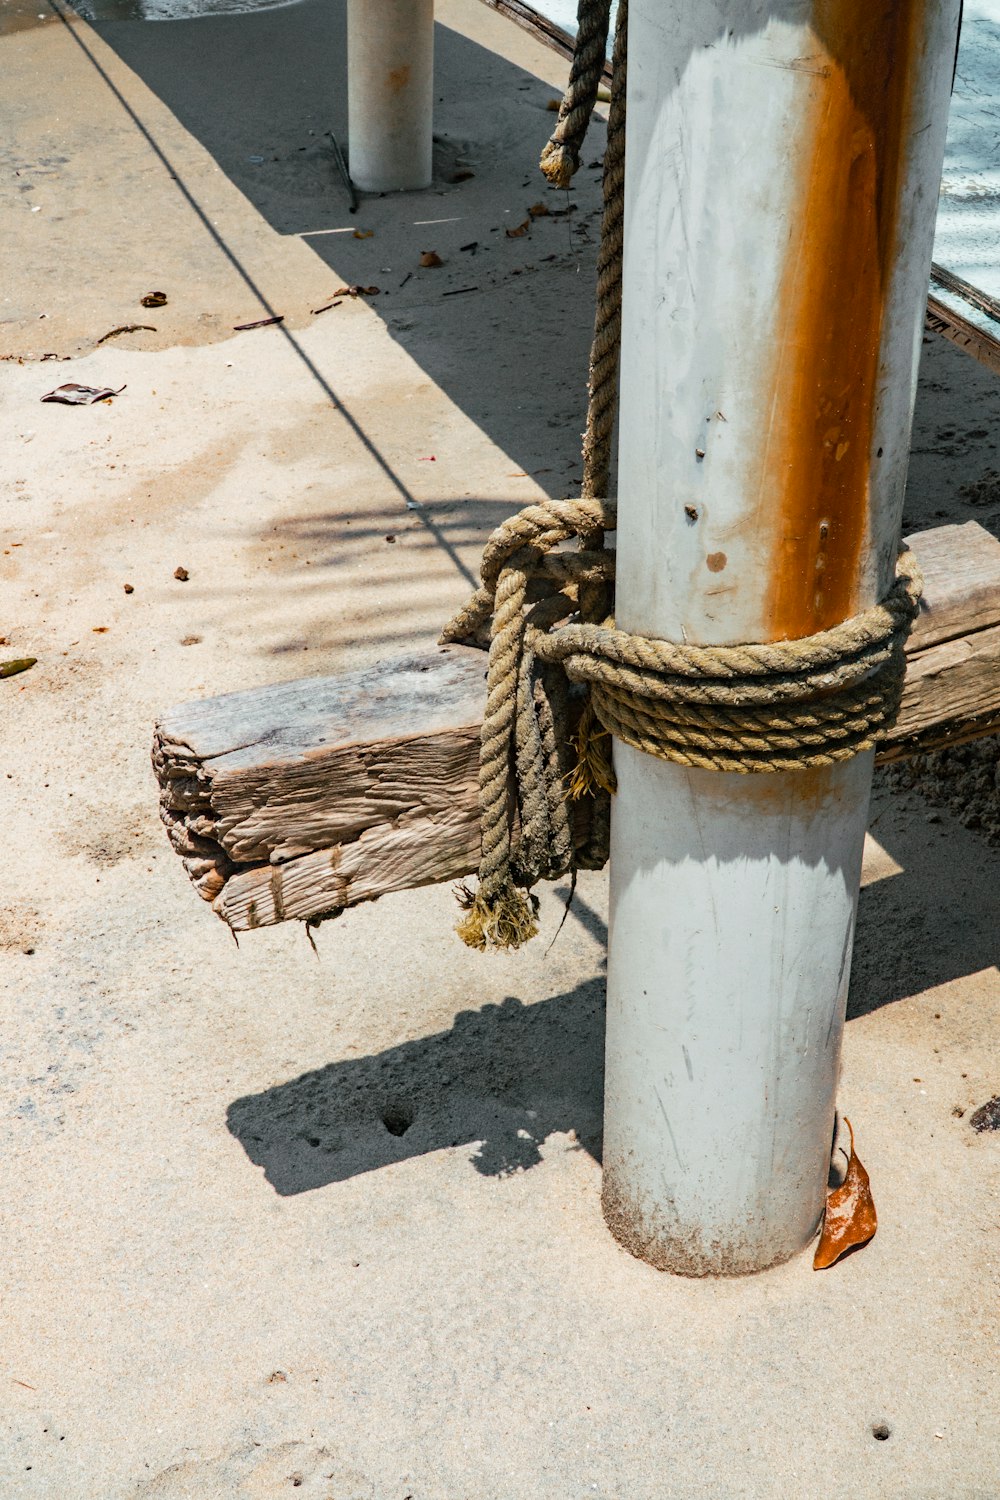 a close up of a rope tied to a pole